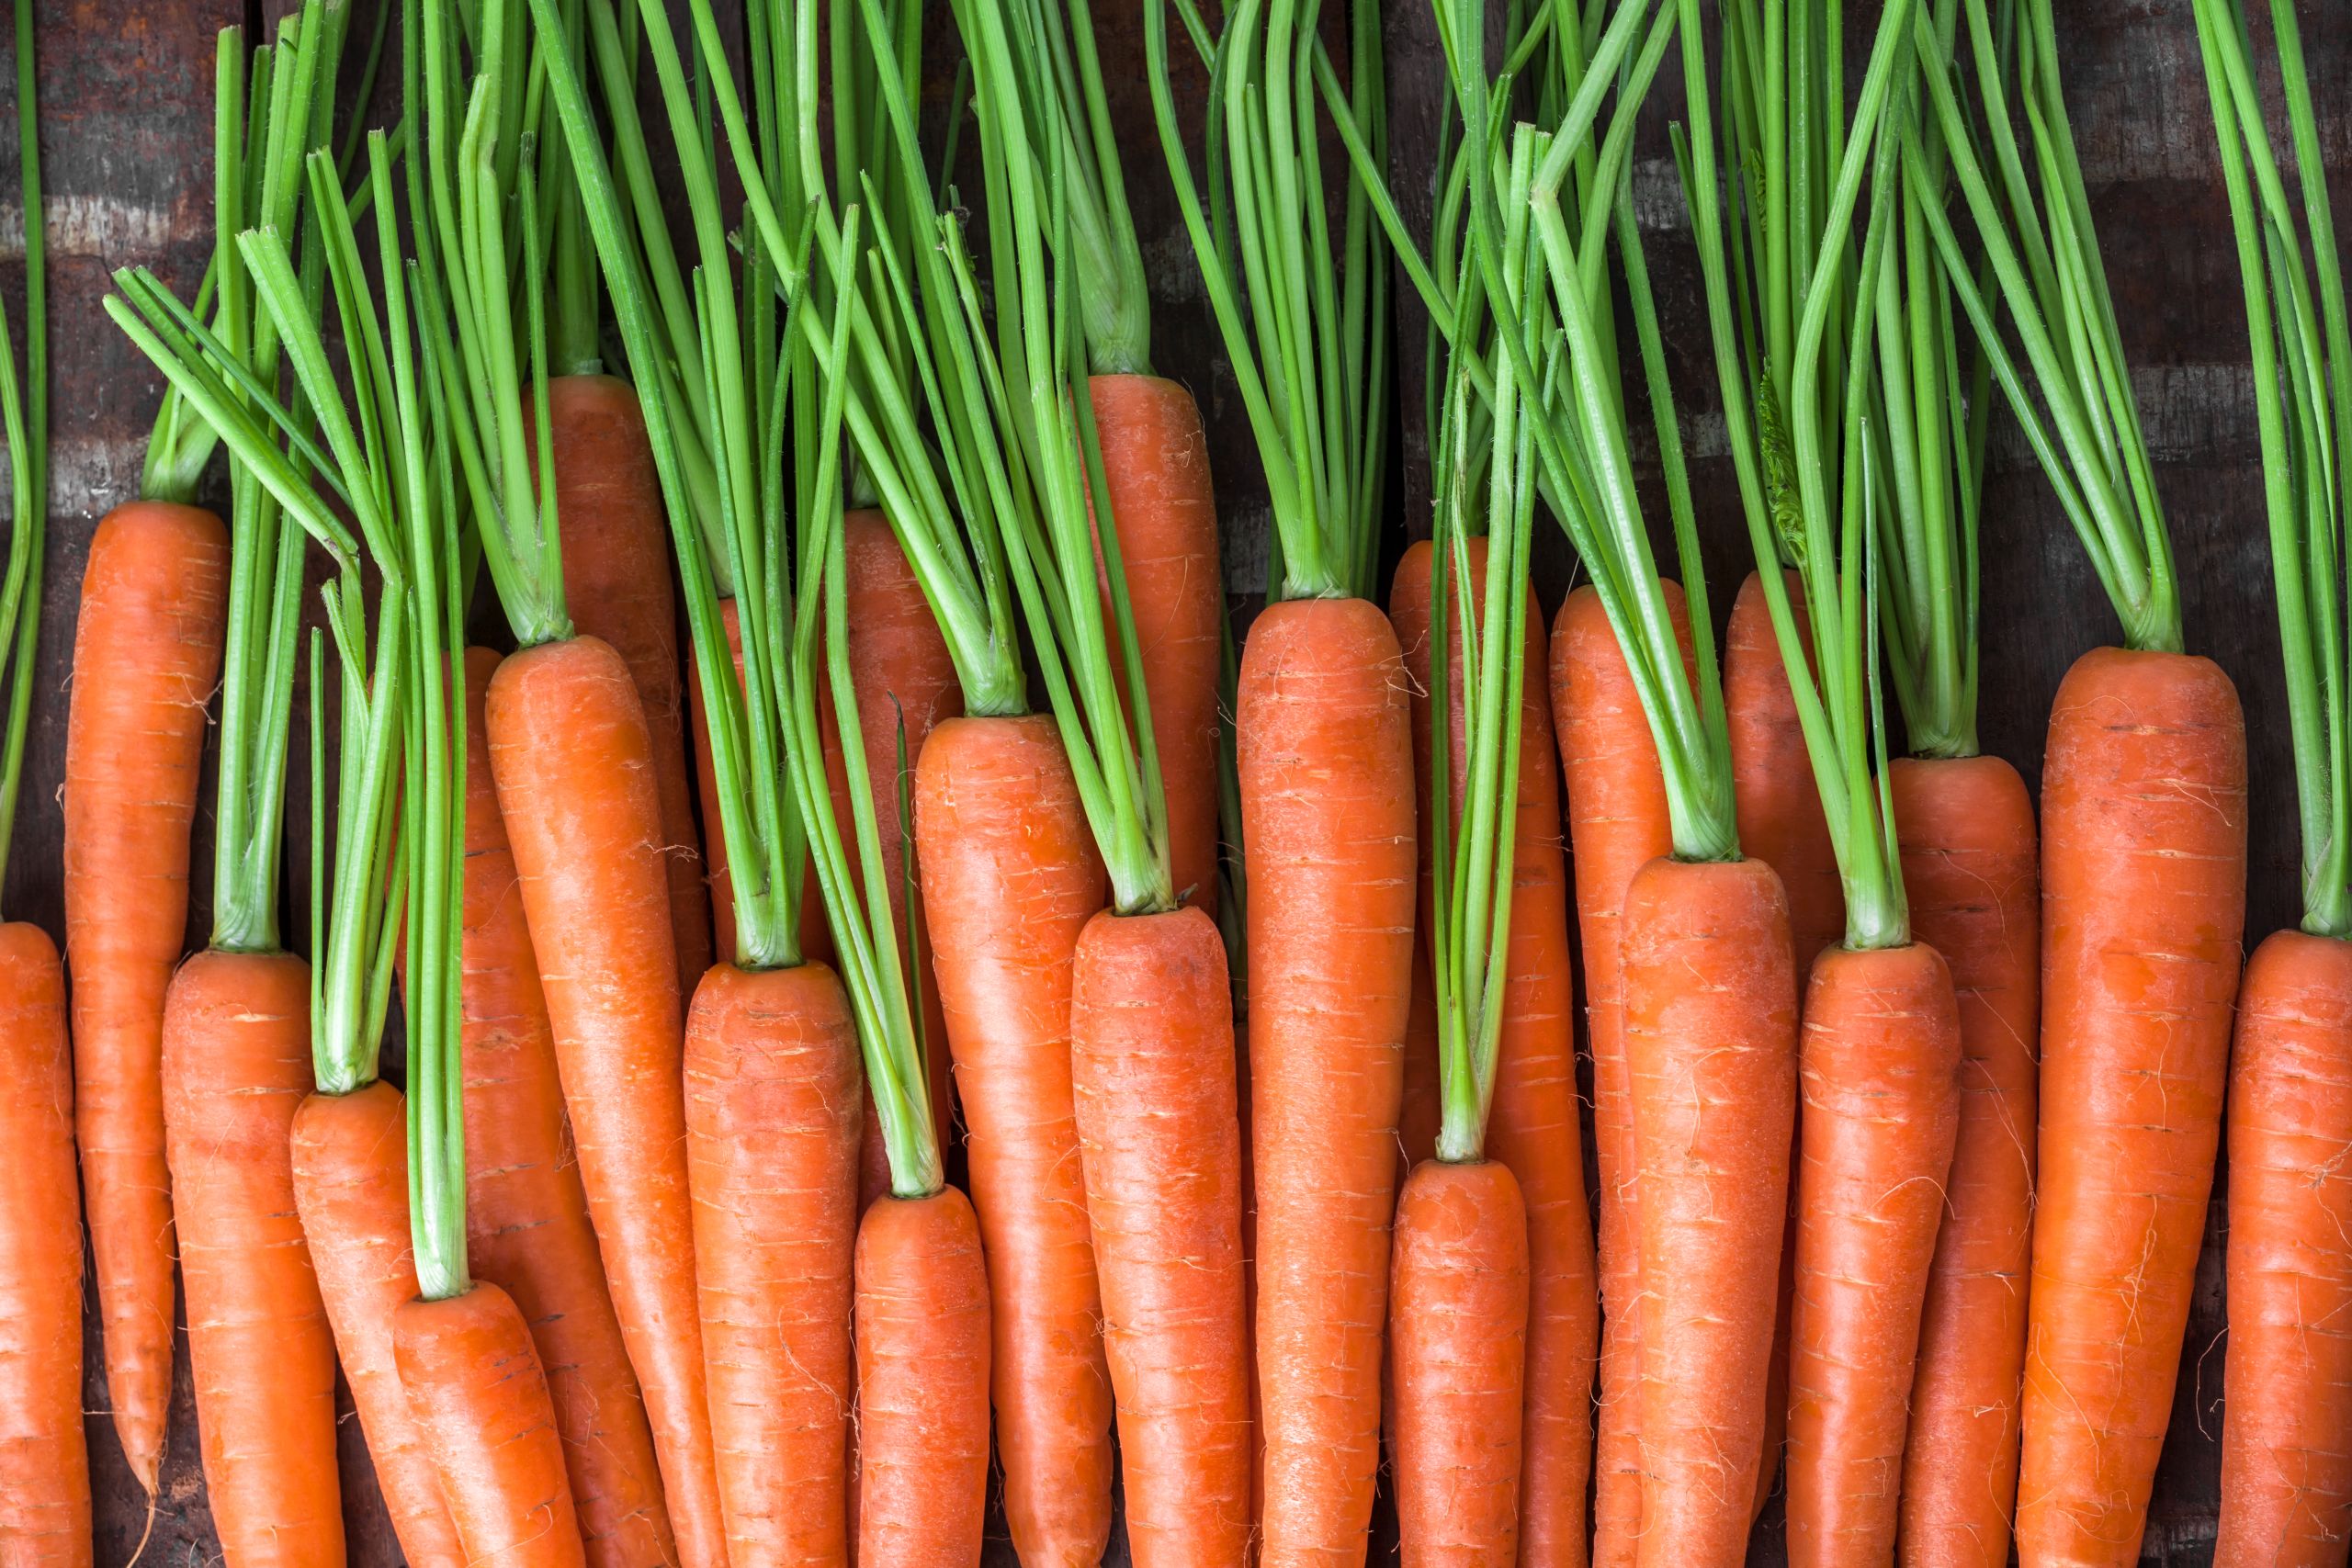 Banner image of carrots